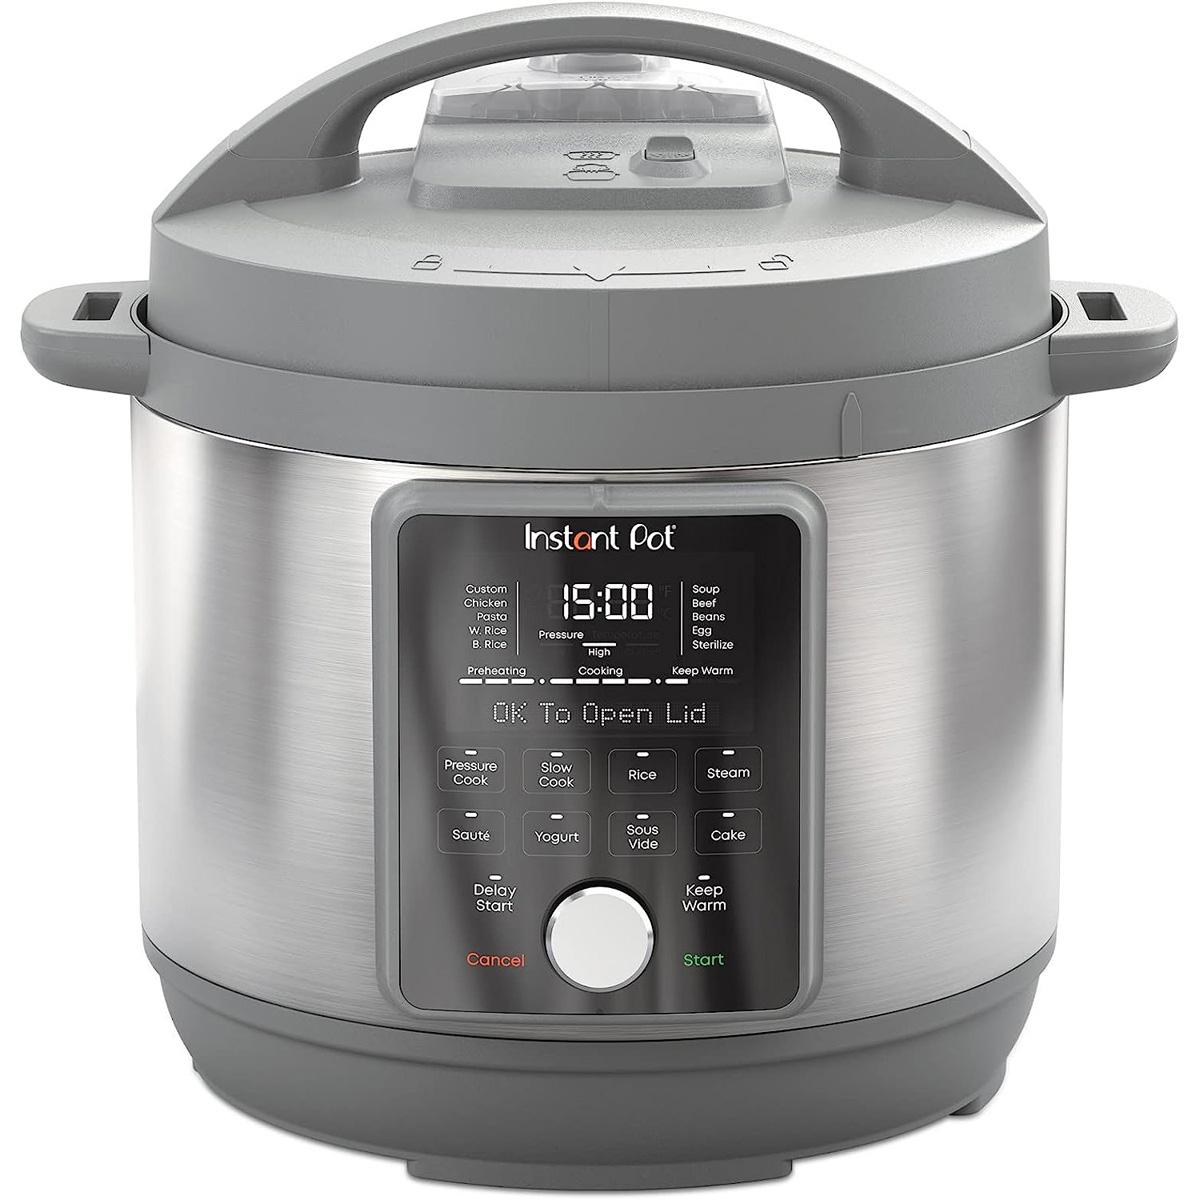 Instant Pot Duo Plus 6Q Whisper Quiet 9-in-1 Pressure Cooker for $79.95 Shipped